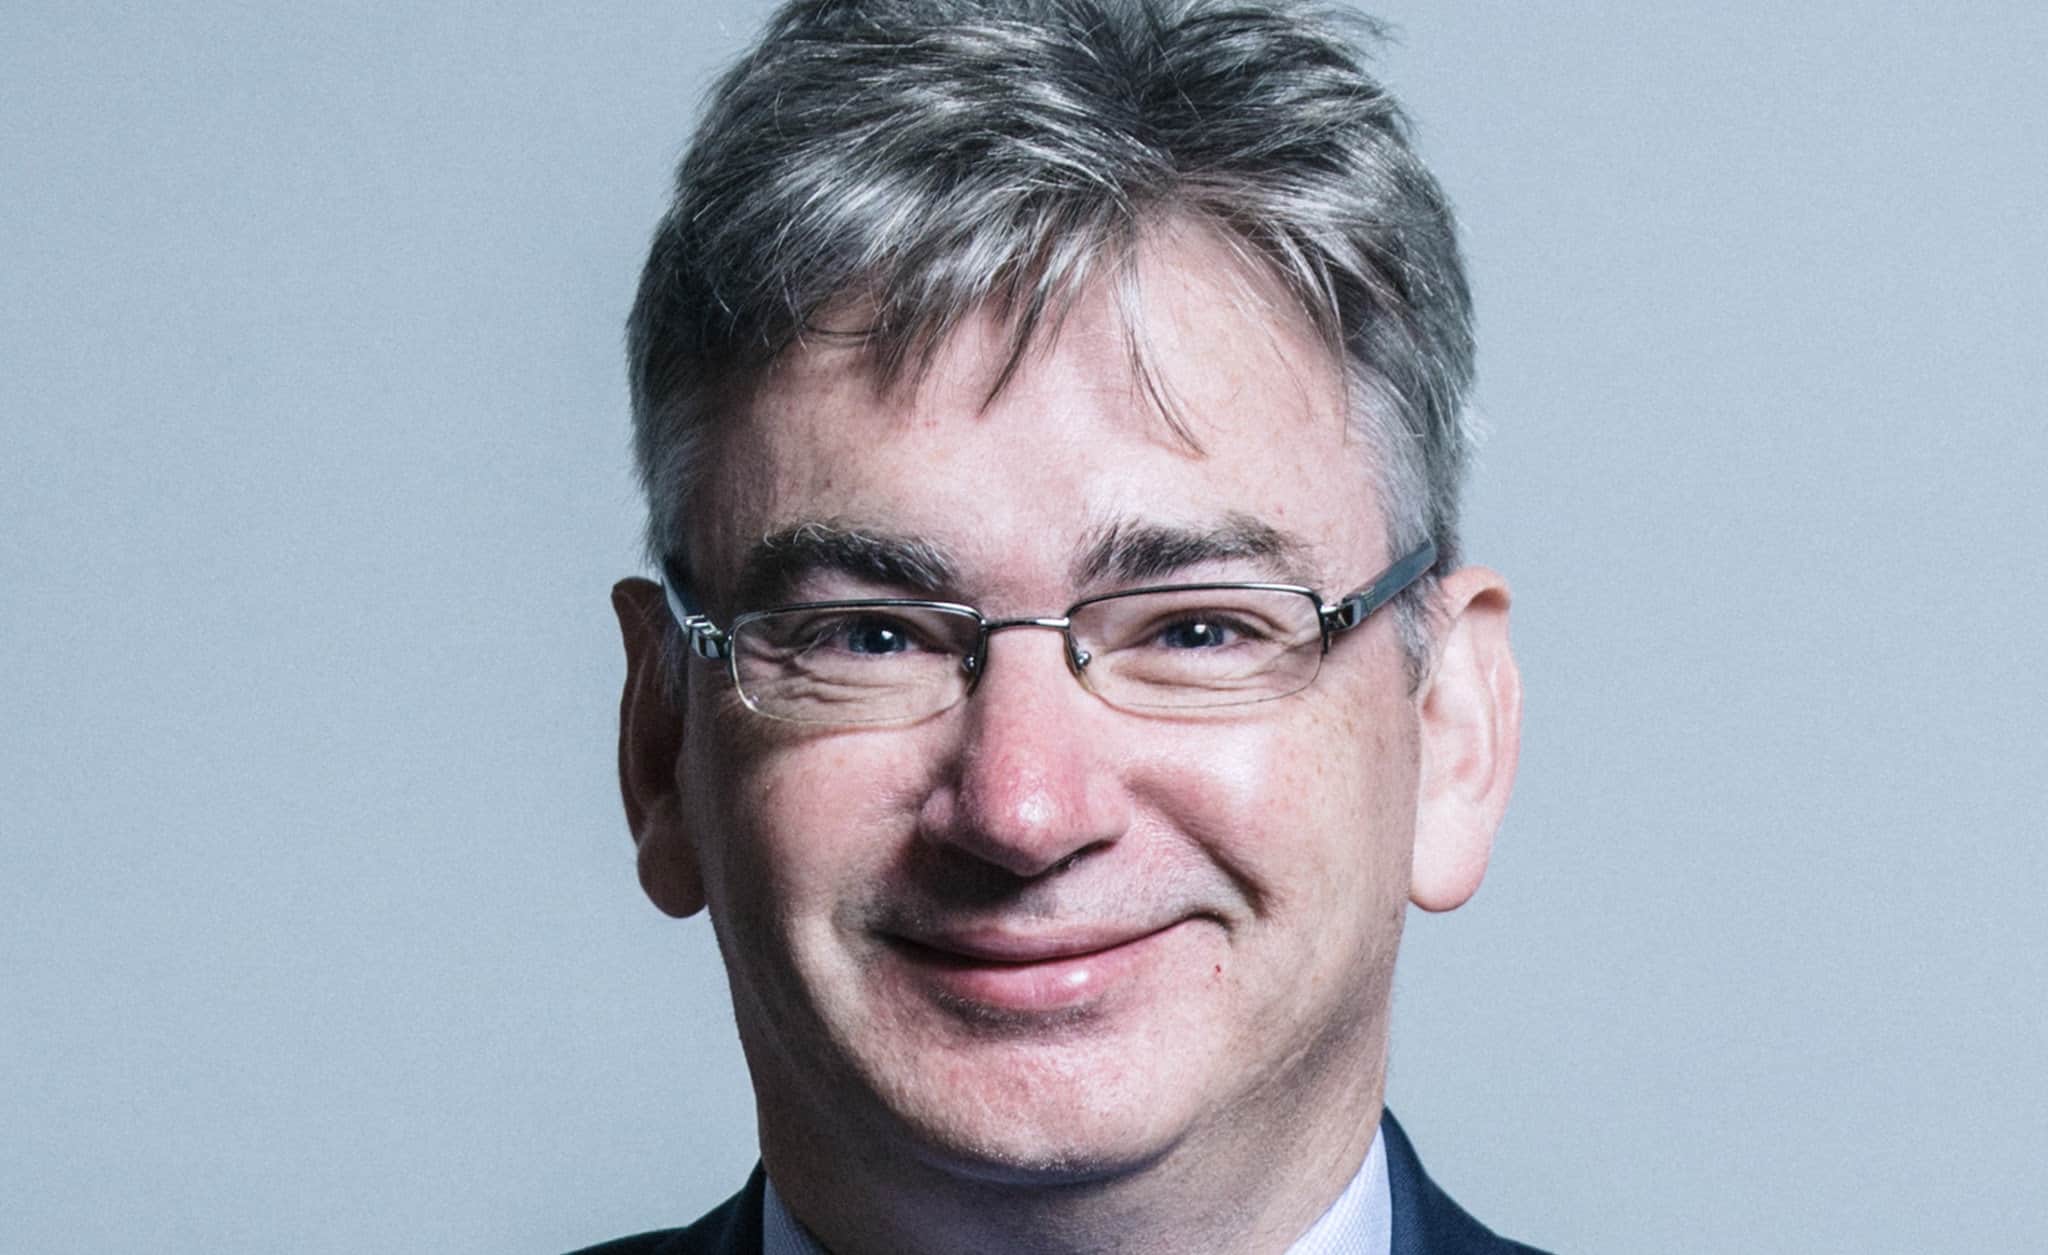 Tory MP Julian Knight faces fresh sexual misconduct allegations – reports